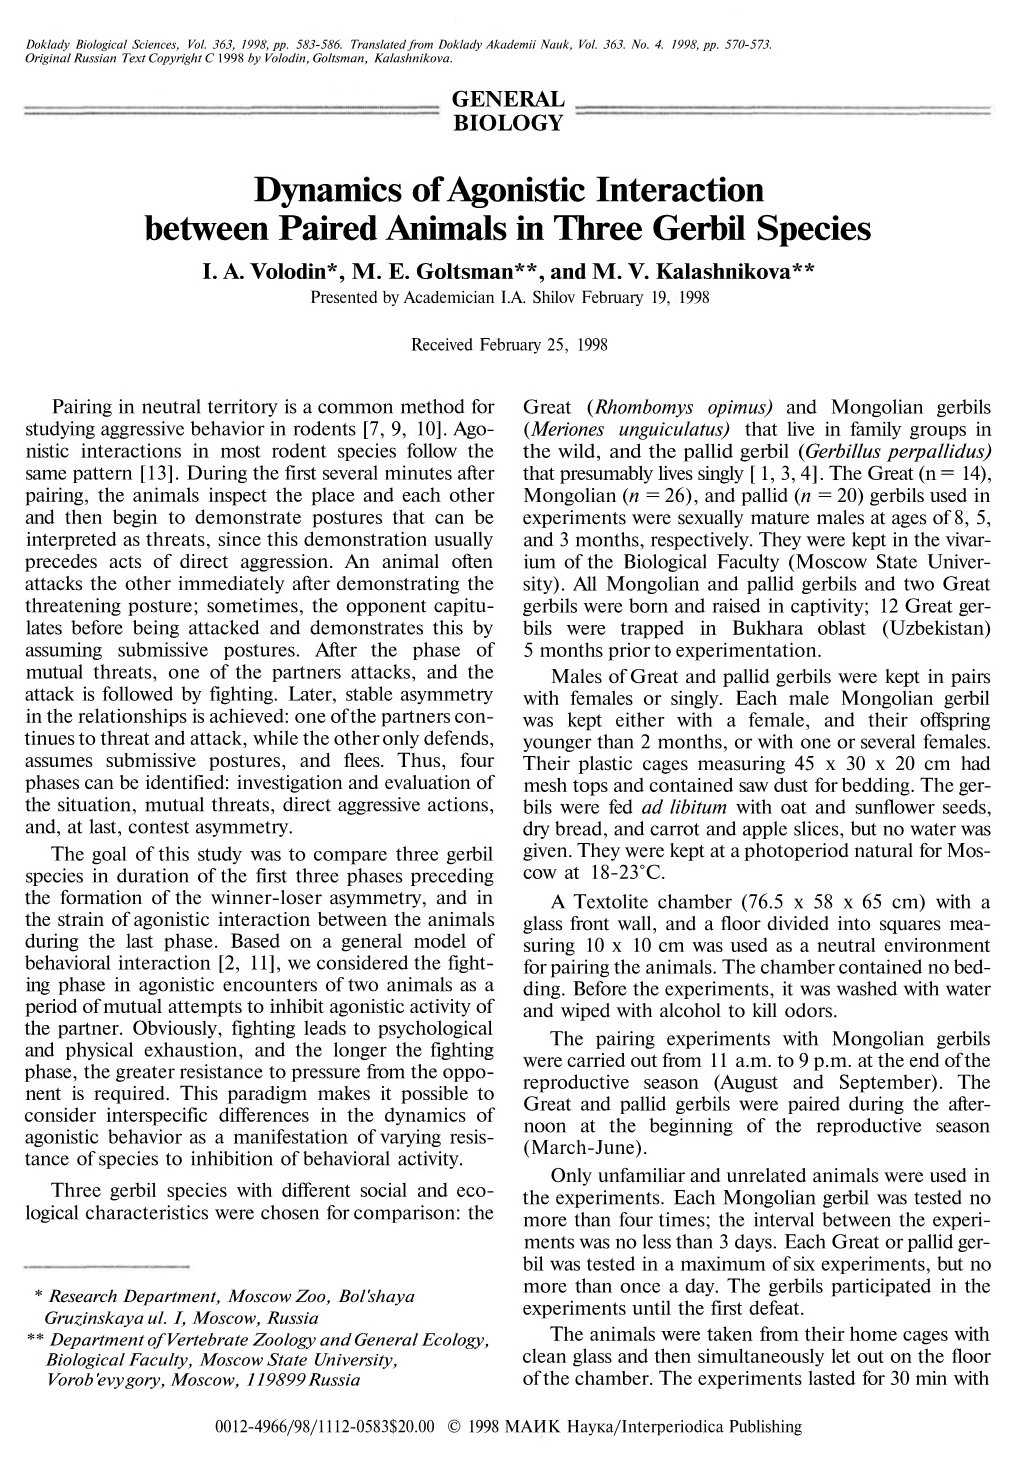 Dynamics of Agonistic Interaction Between Paired Animals in Three Gerbil Species I